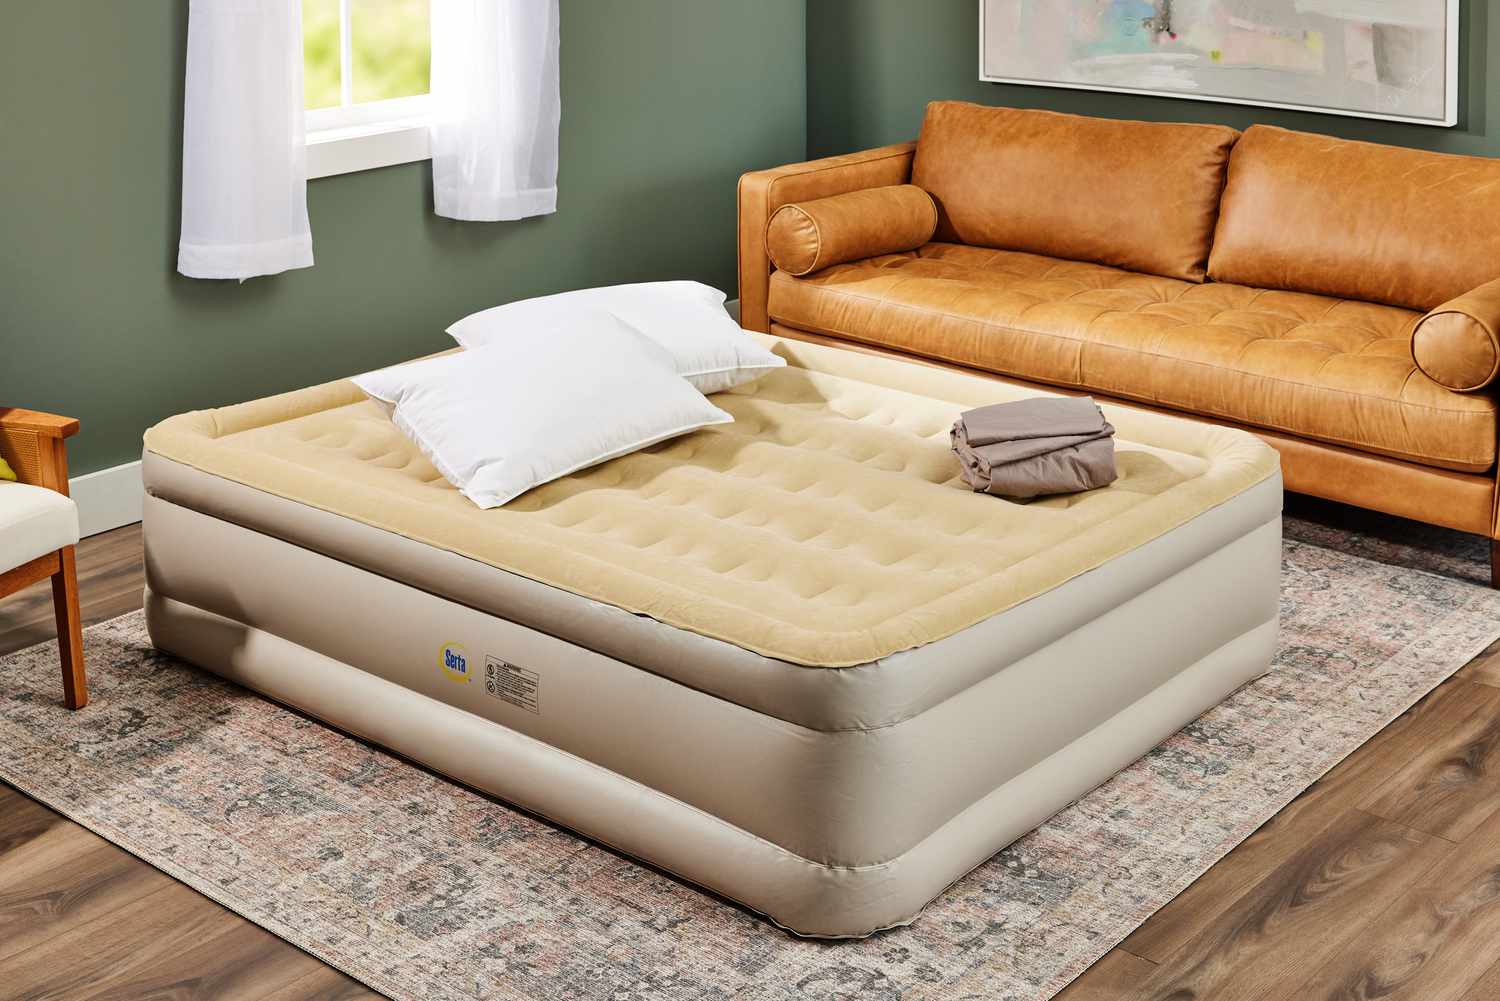 The Serta Raised Air Mattress with Never Flat Pump fully inflated